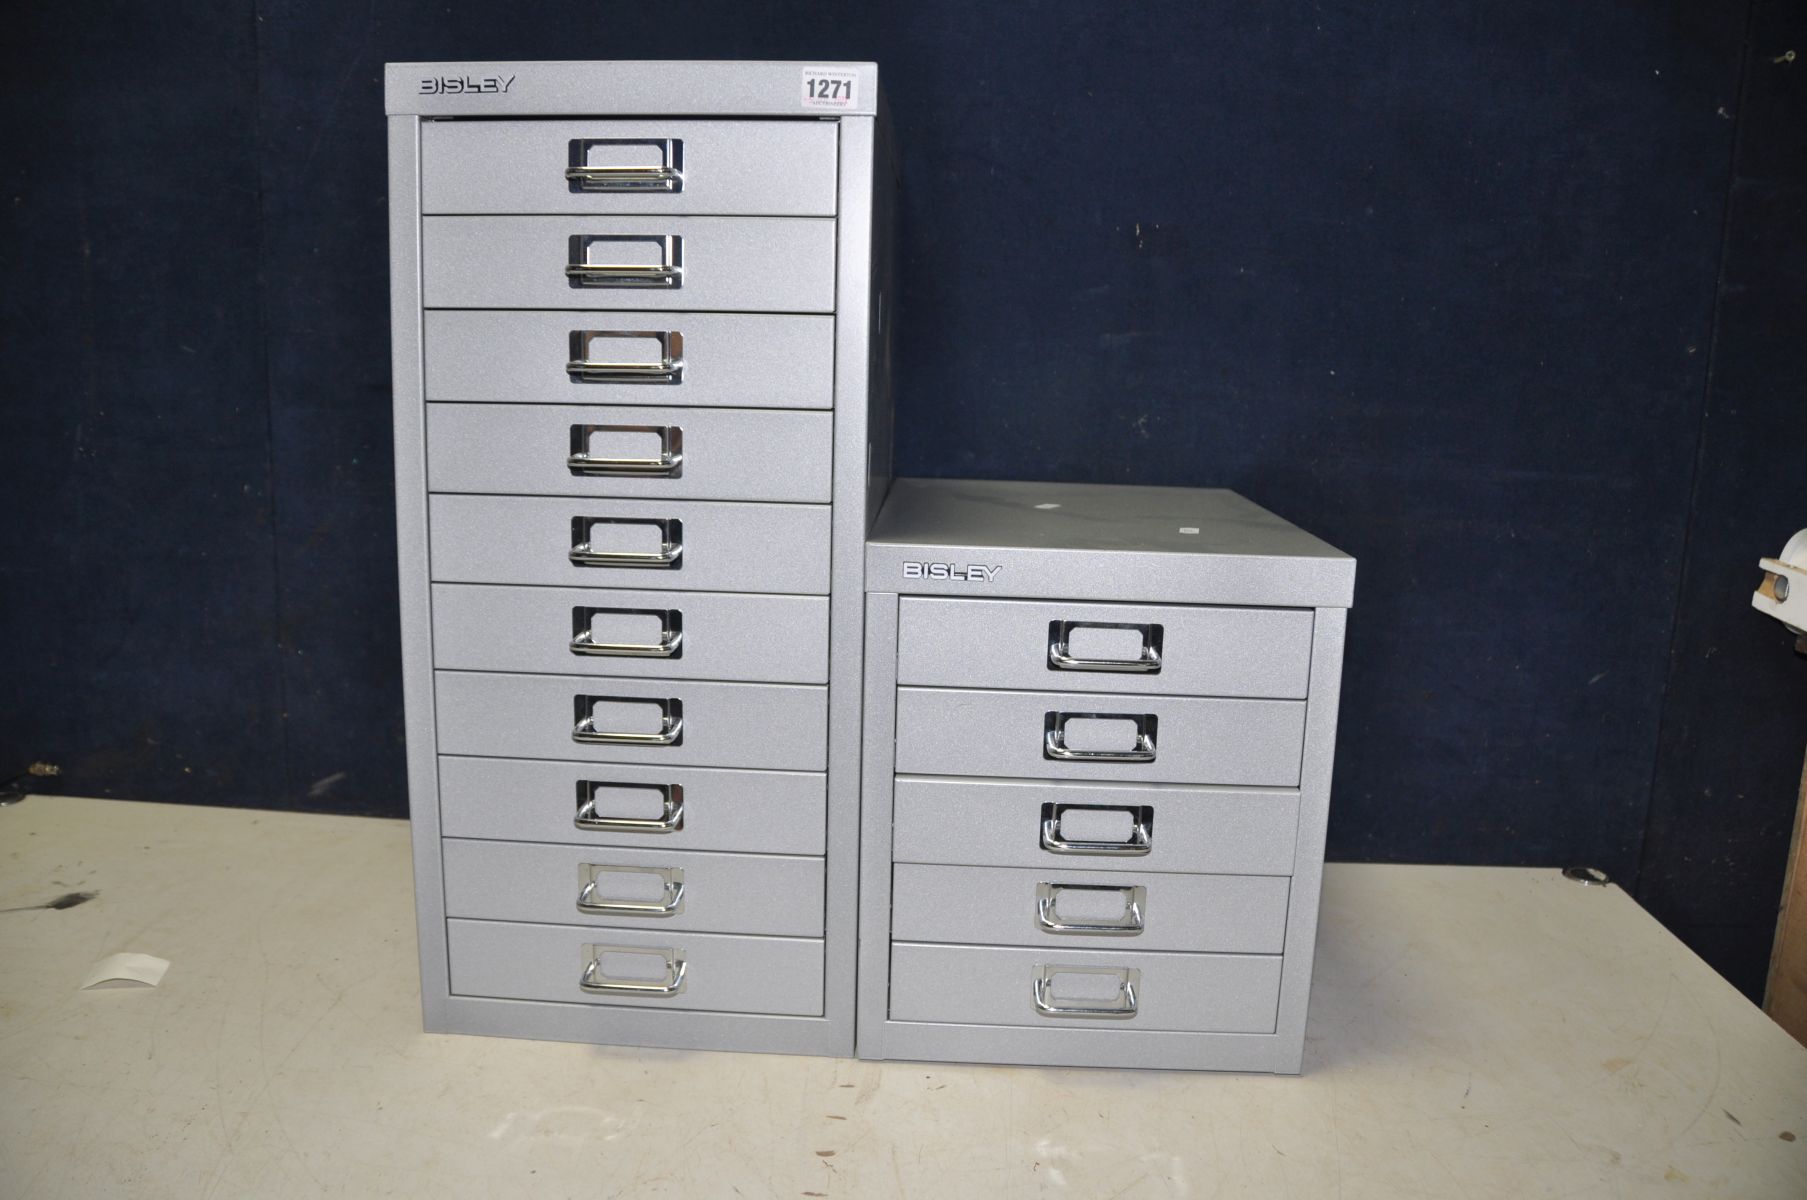 BILSLEY MULTIDRAW CABINETS comprising a ten draw cabinet along with a smaller five draw, the